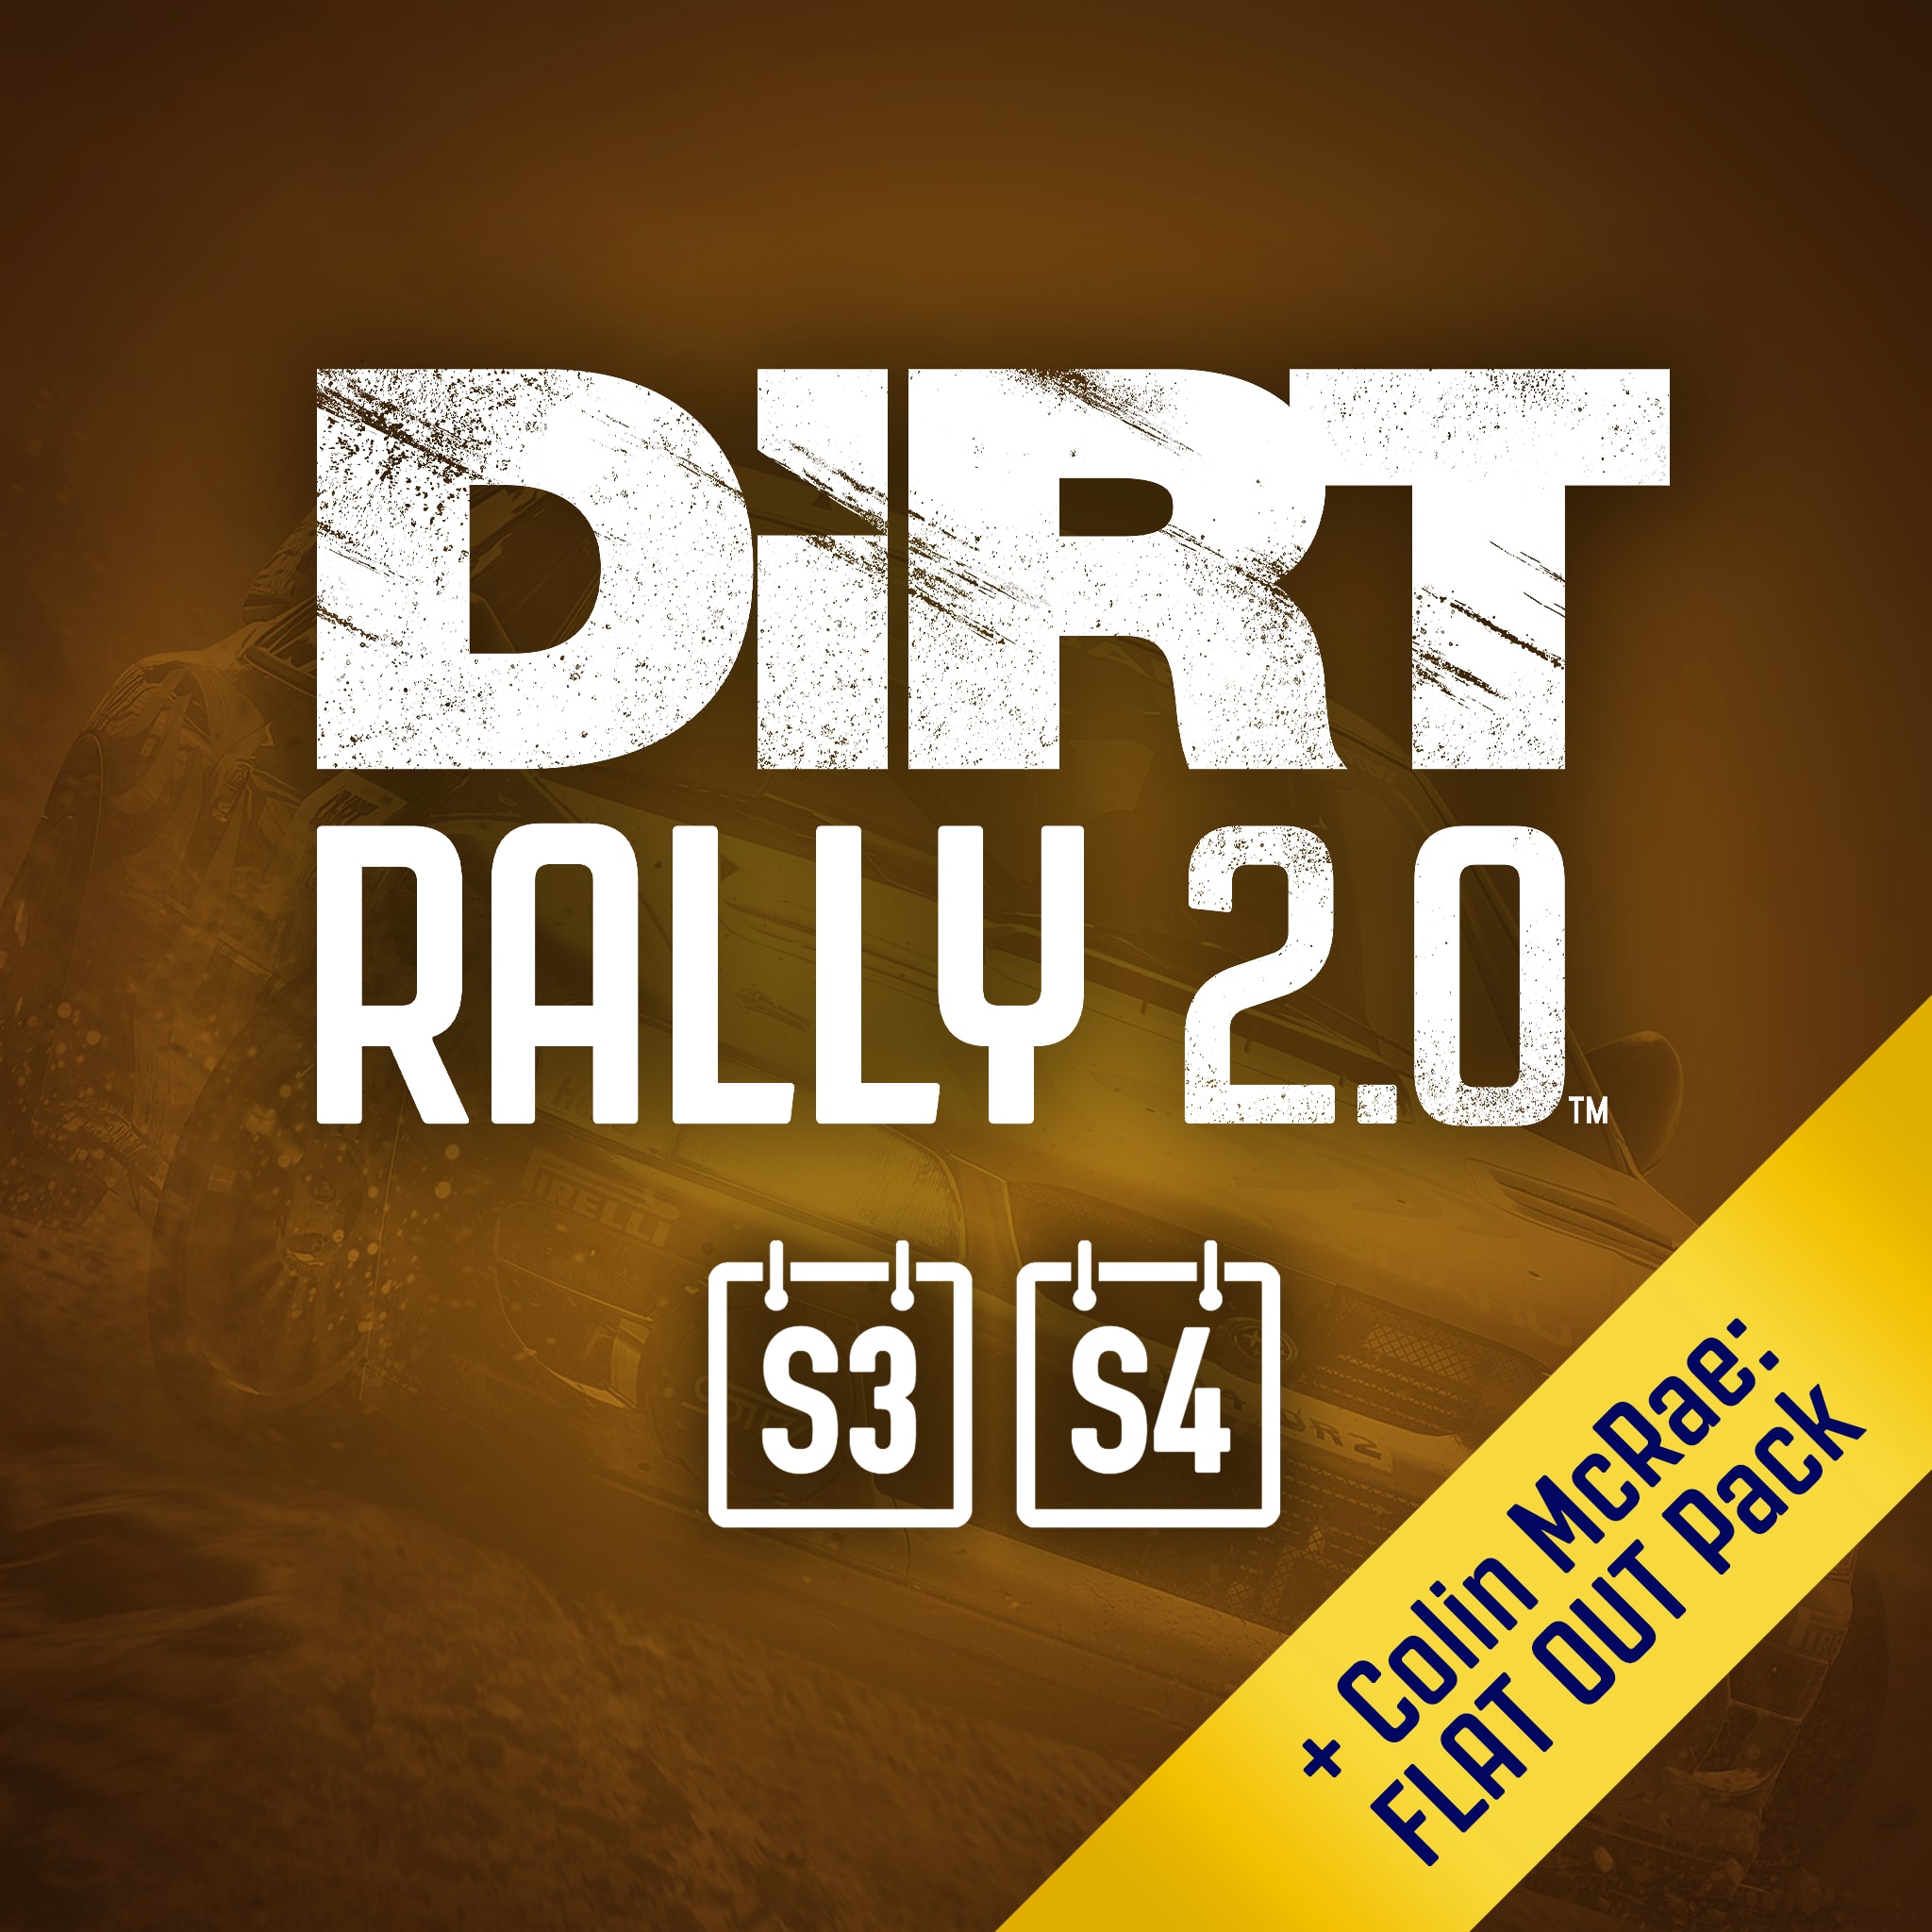 DiRT Rally 2.0 Deluxe Content Pack 2.0 (Seasons 3 and 4)